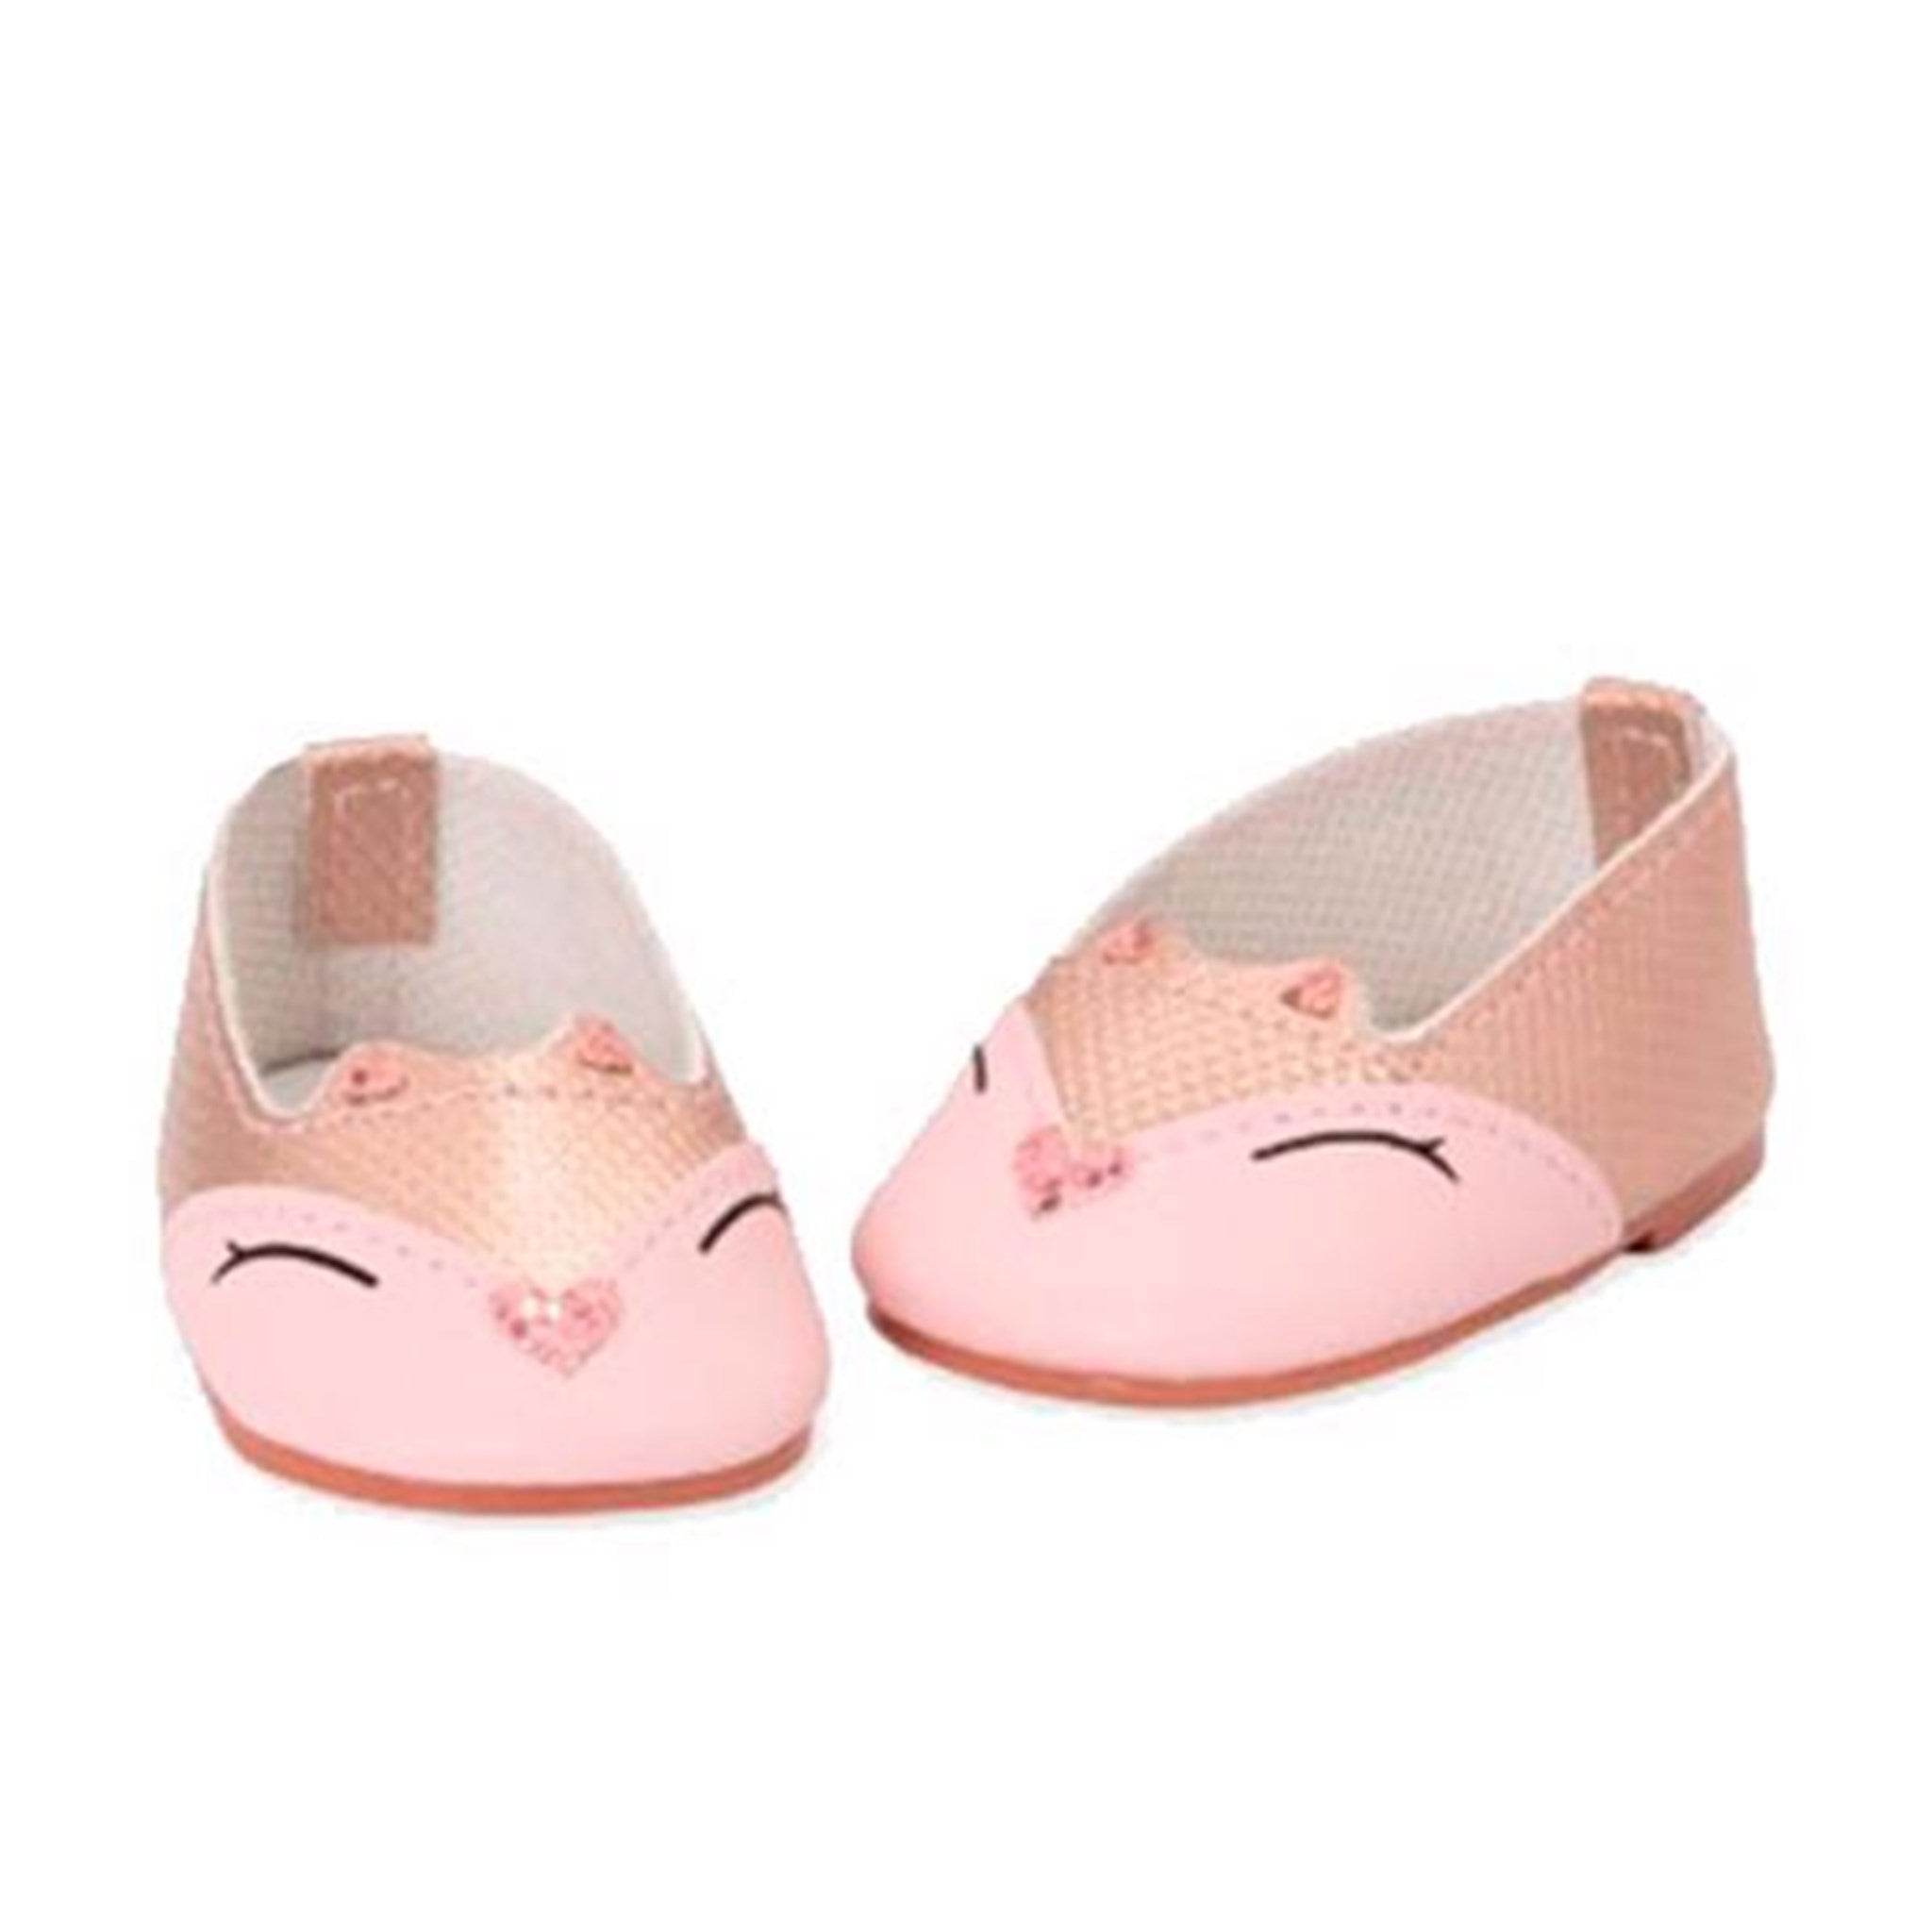 Our Generation Doll Shoes - Ballerina